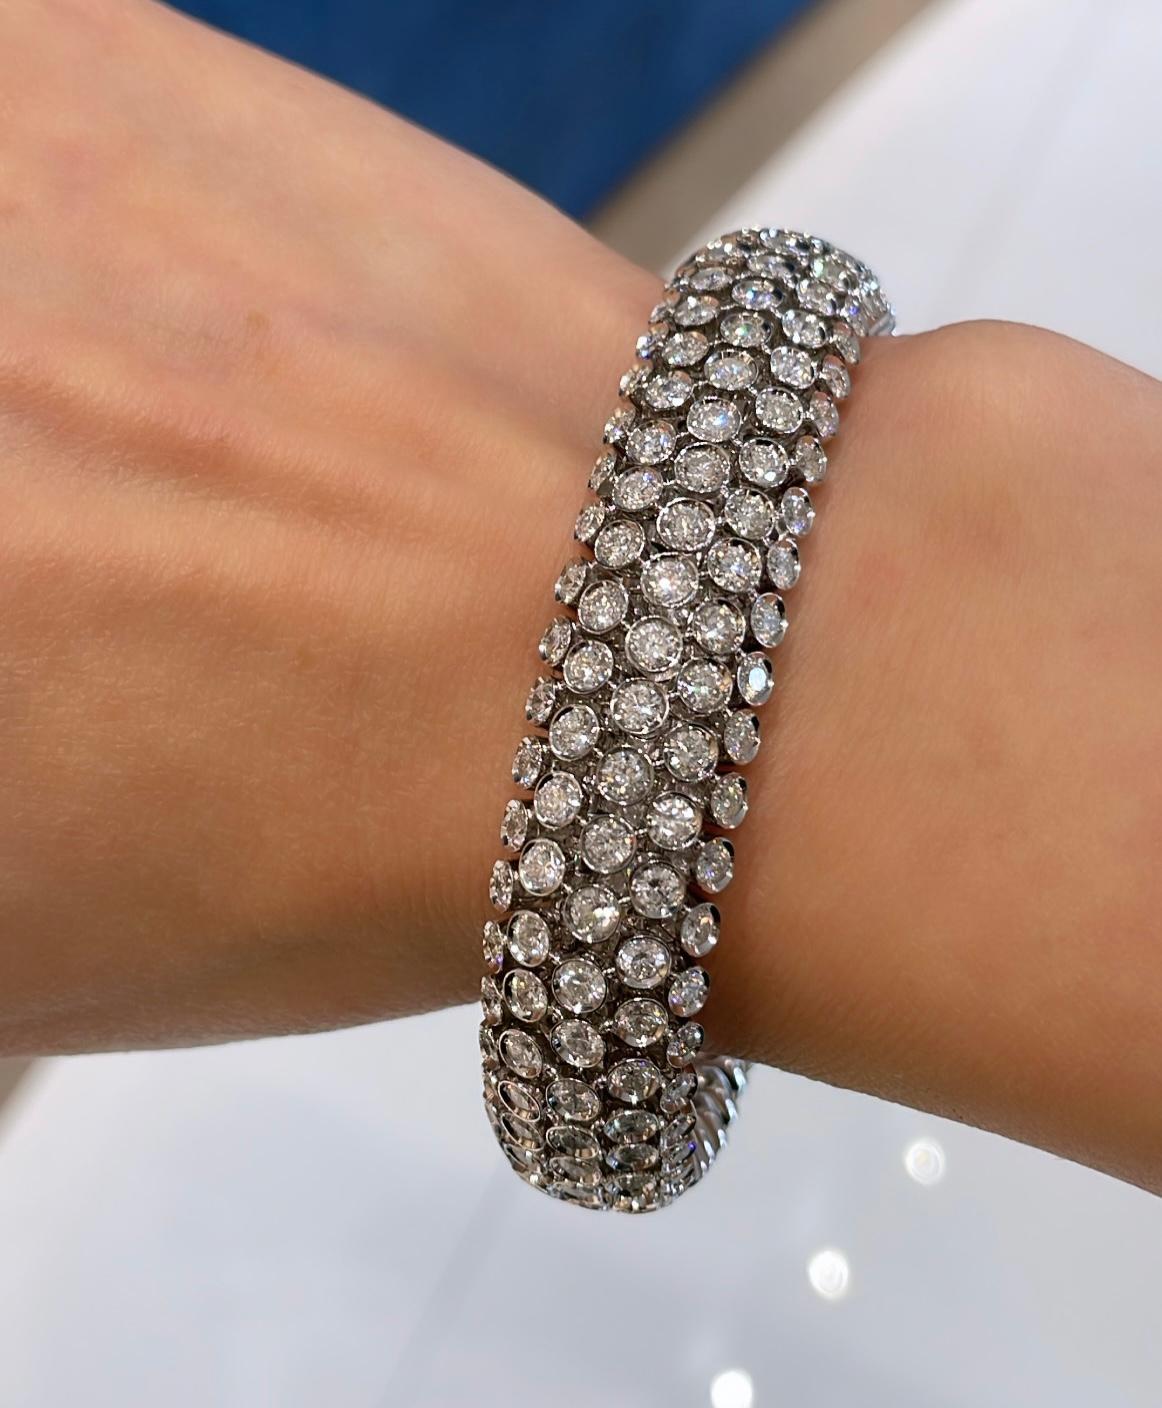 This stunning 18K white gold bangle has 276 round brilliant diamonds totaling 14 carats. This bangle is perfect for a night out or a special event. It is a true showstopper that will make a statement!
It can be worn in both directions as shown in